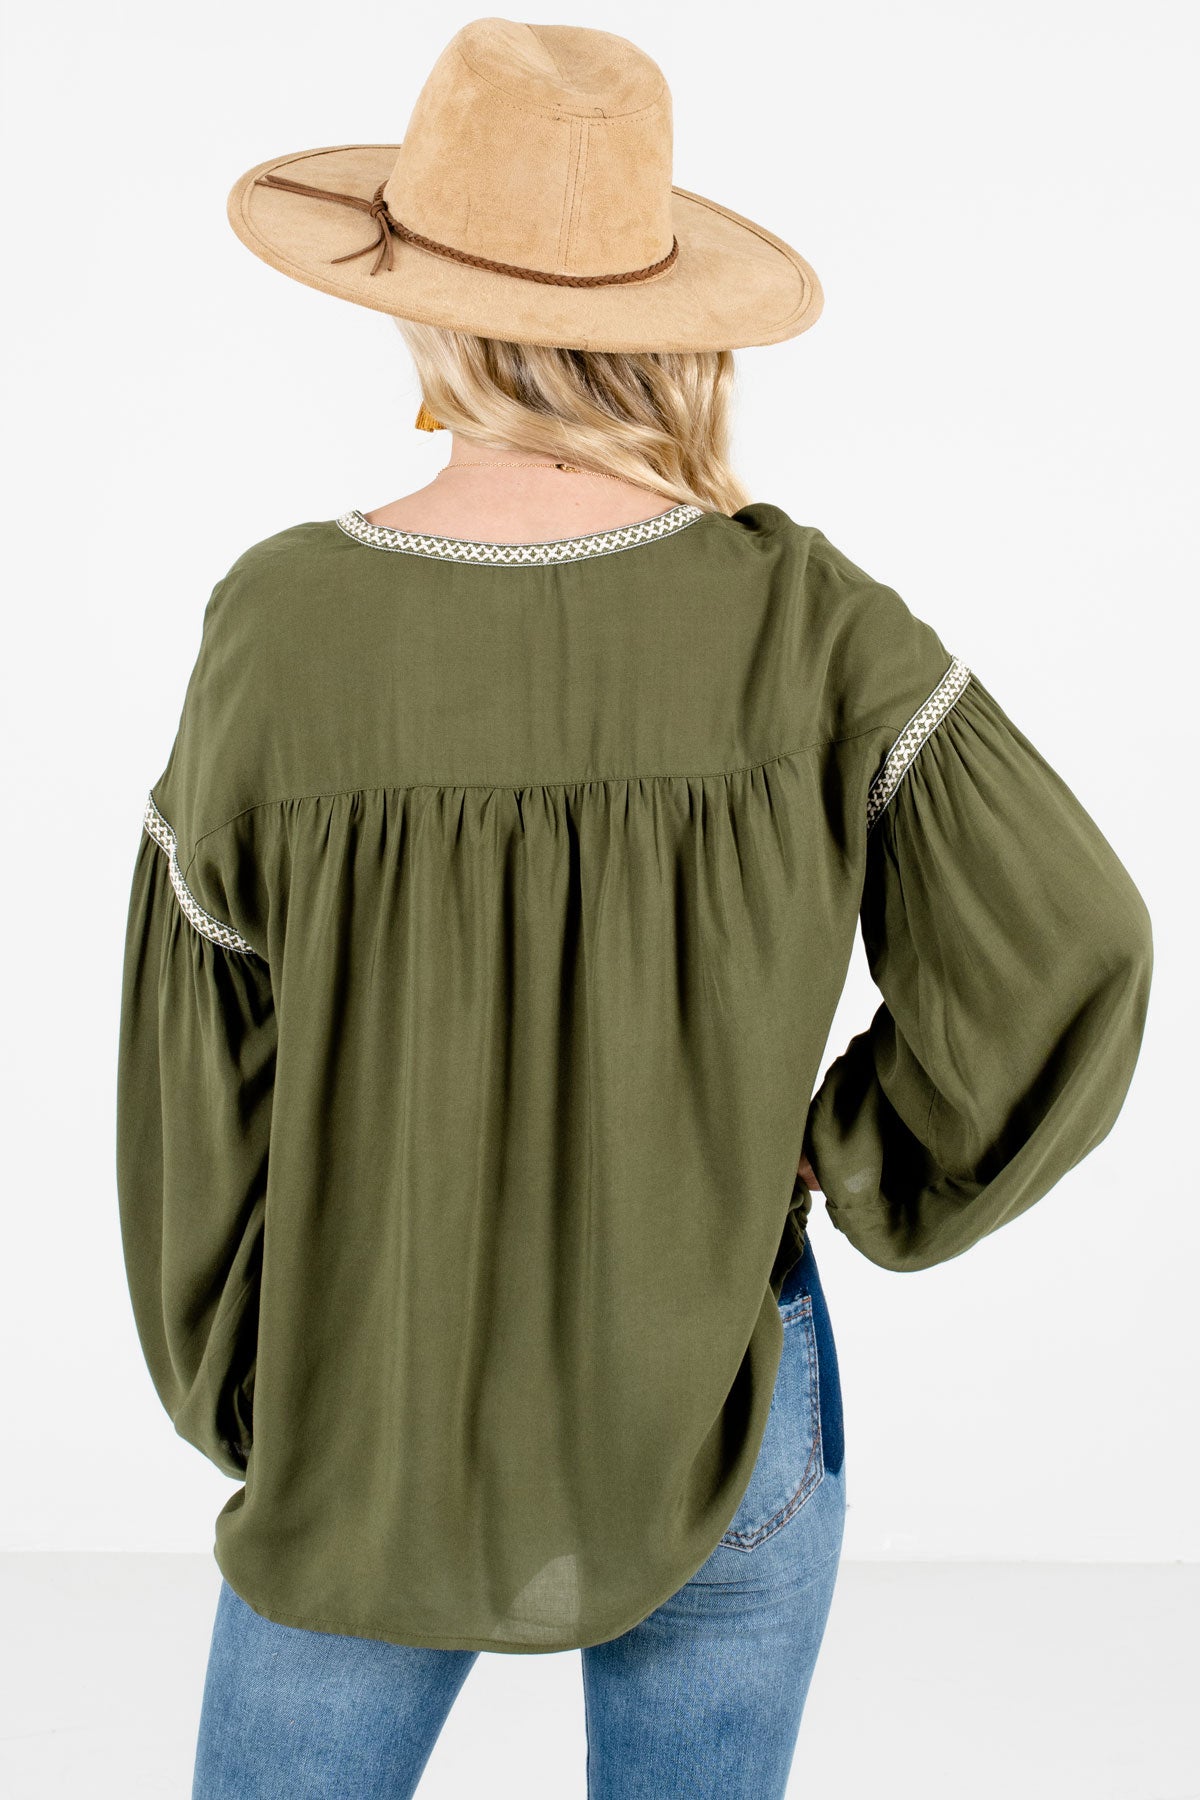 Women’s Olive Green Crochet Accented Boutique Blouse